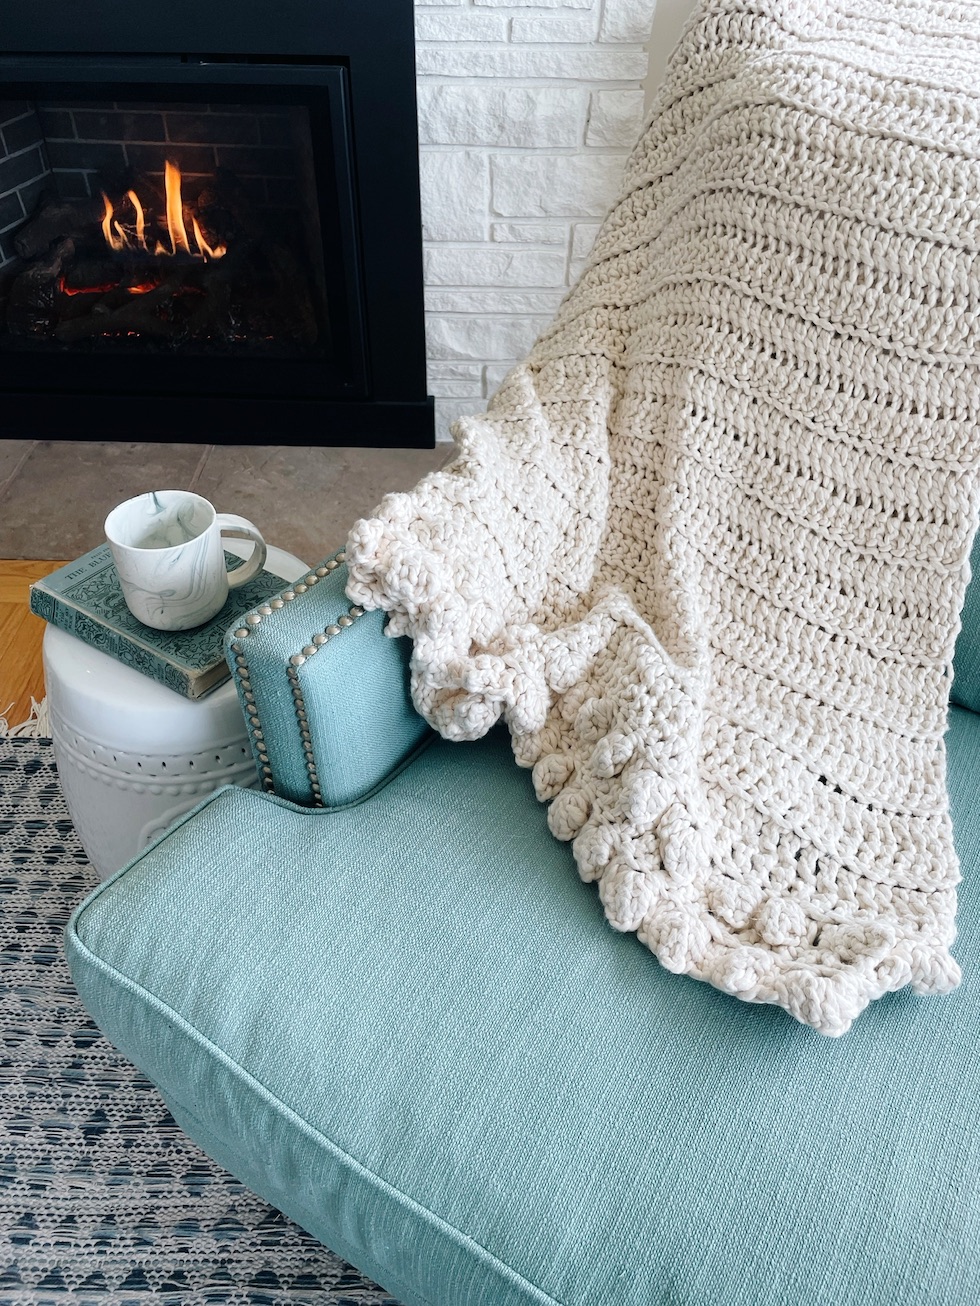 A Cozy Throw Blanket for Fall (+ Giveaway)